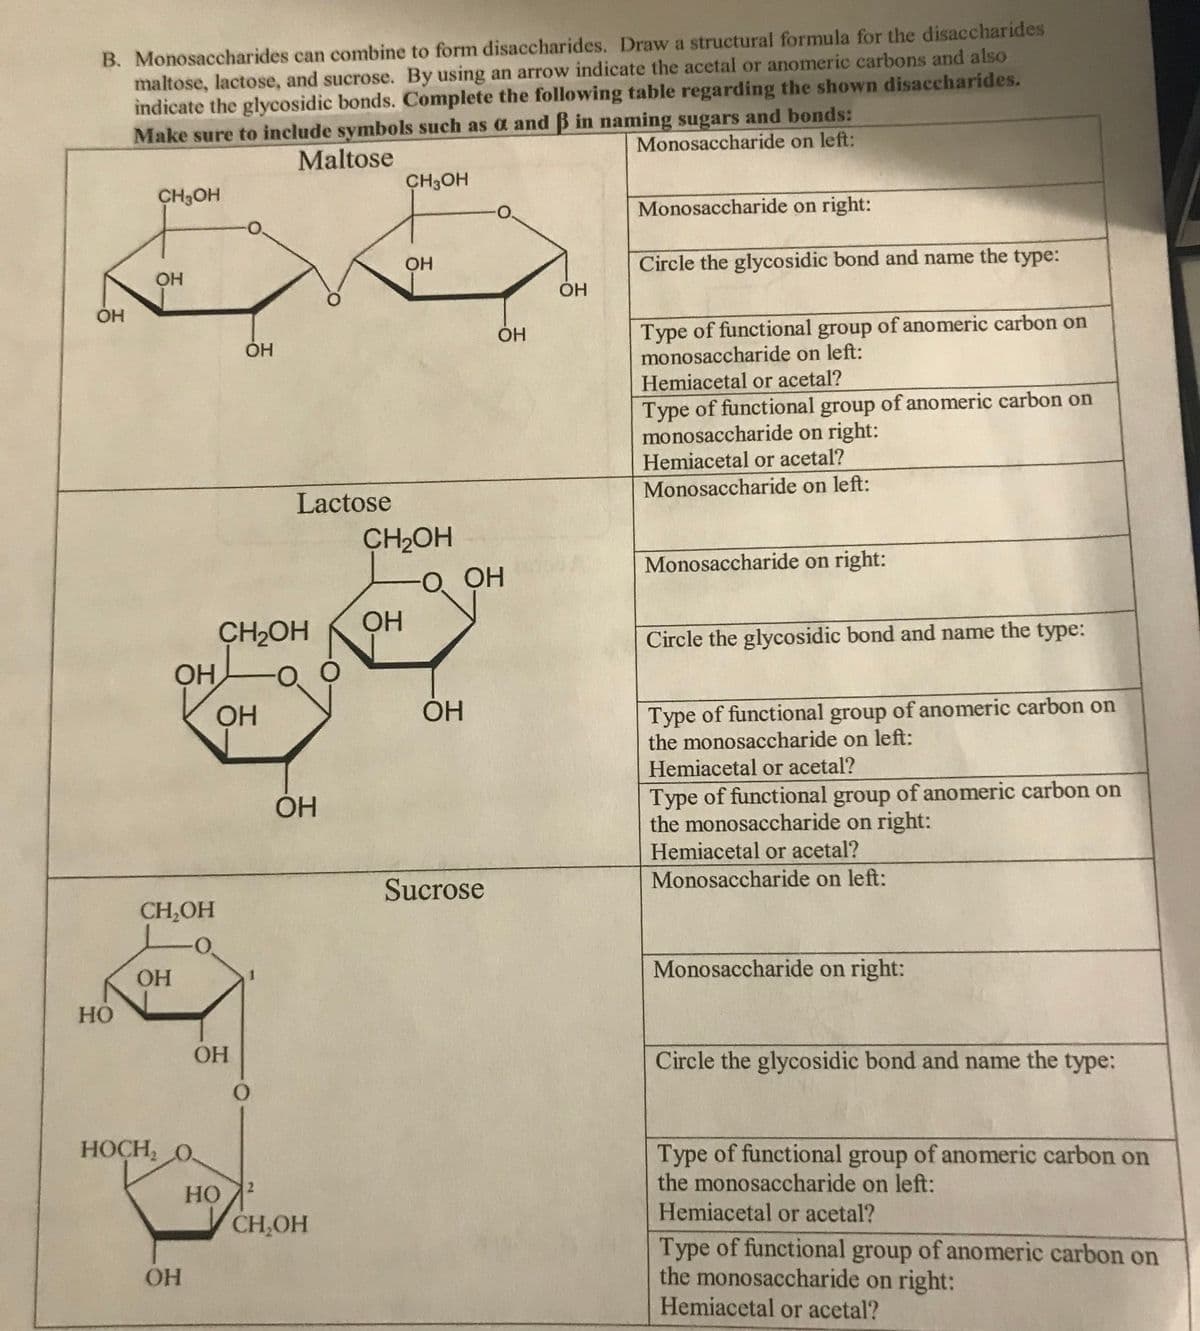 B. Monosaccharides can combine to form disaccharides. Draw a structural formula for the disaccharides
maltose, lactose, and sucrose. By using an arrow indicate the acetal or anomeric carbons and also
indicate the glycosidic bonds. Complete the following table regarding the shown disaccharides.
Make sure to include symbols such as a and B in naming sugars and bonds:
Monosaccharide on left:
Maltose
CH3OH
CH3OH
Monosaccharide on right:
OH
Circle the glycosidic bond and name the type:
OH
ÓH
Type of functional group of anomeric carbon on
monosaccharide on left:
Hemiacetal or acetal?
ÓH
Type of functional group of anomeric carbon on
monosaccharide on right:
Hemiacetal or acetal?
Monosaccharide on left:
Lactose
CH2OH
O OH
Monosaccharide on right:
CH2OH
Circle the glycosidic bond and name the type:
Type of functional group of anomeric carbon on
the monosaccharide on left:
Hemiacetal or acetal?
OH
Type of functional group of anomeric carbon on
the monosaccharide on right:
Hemiacetal or acetal?
Monosaccharide on left:
Sucrose
CH,OH
O.
Monosaccharide on right:
HO
HO
OH
Circle the glycosidic bond and name the type:
HOCH, O
Type of functional group of anomeric carbon on
the monosaccharide on left:
Hemiacetal or acetal?
HO
CH,OH
Type of functional group of anomeric carbon on
the monosaccharide on right:
Hemiacetal or acetal?
OH
